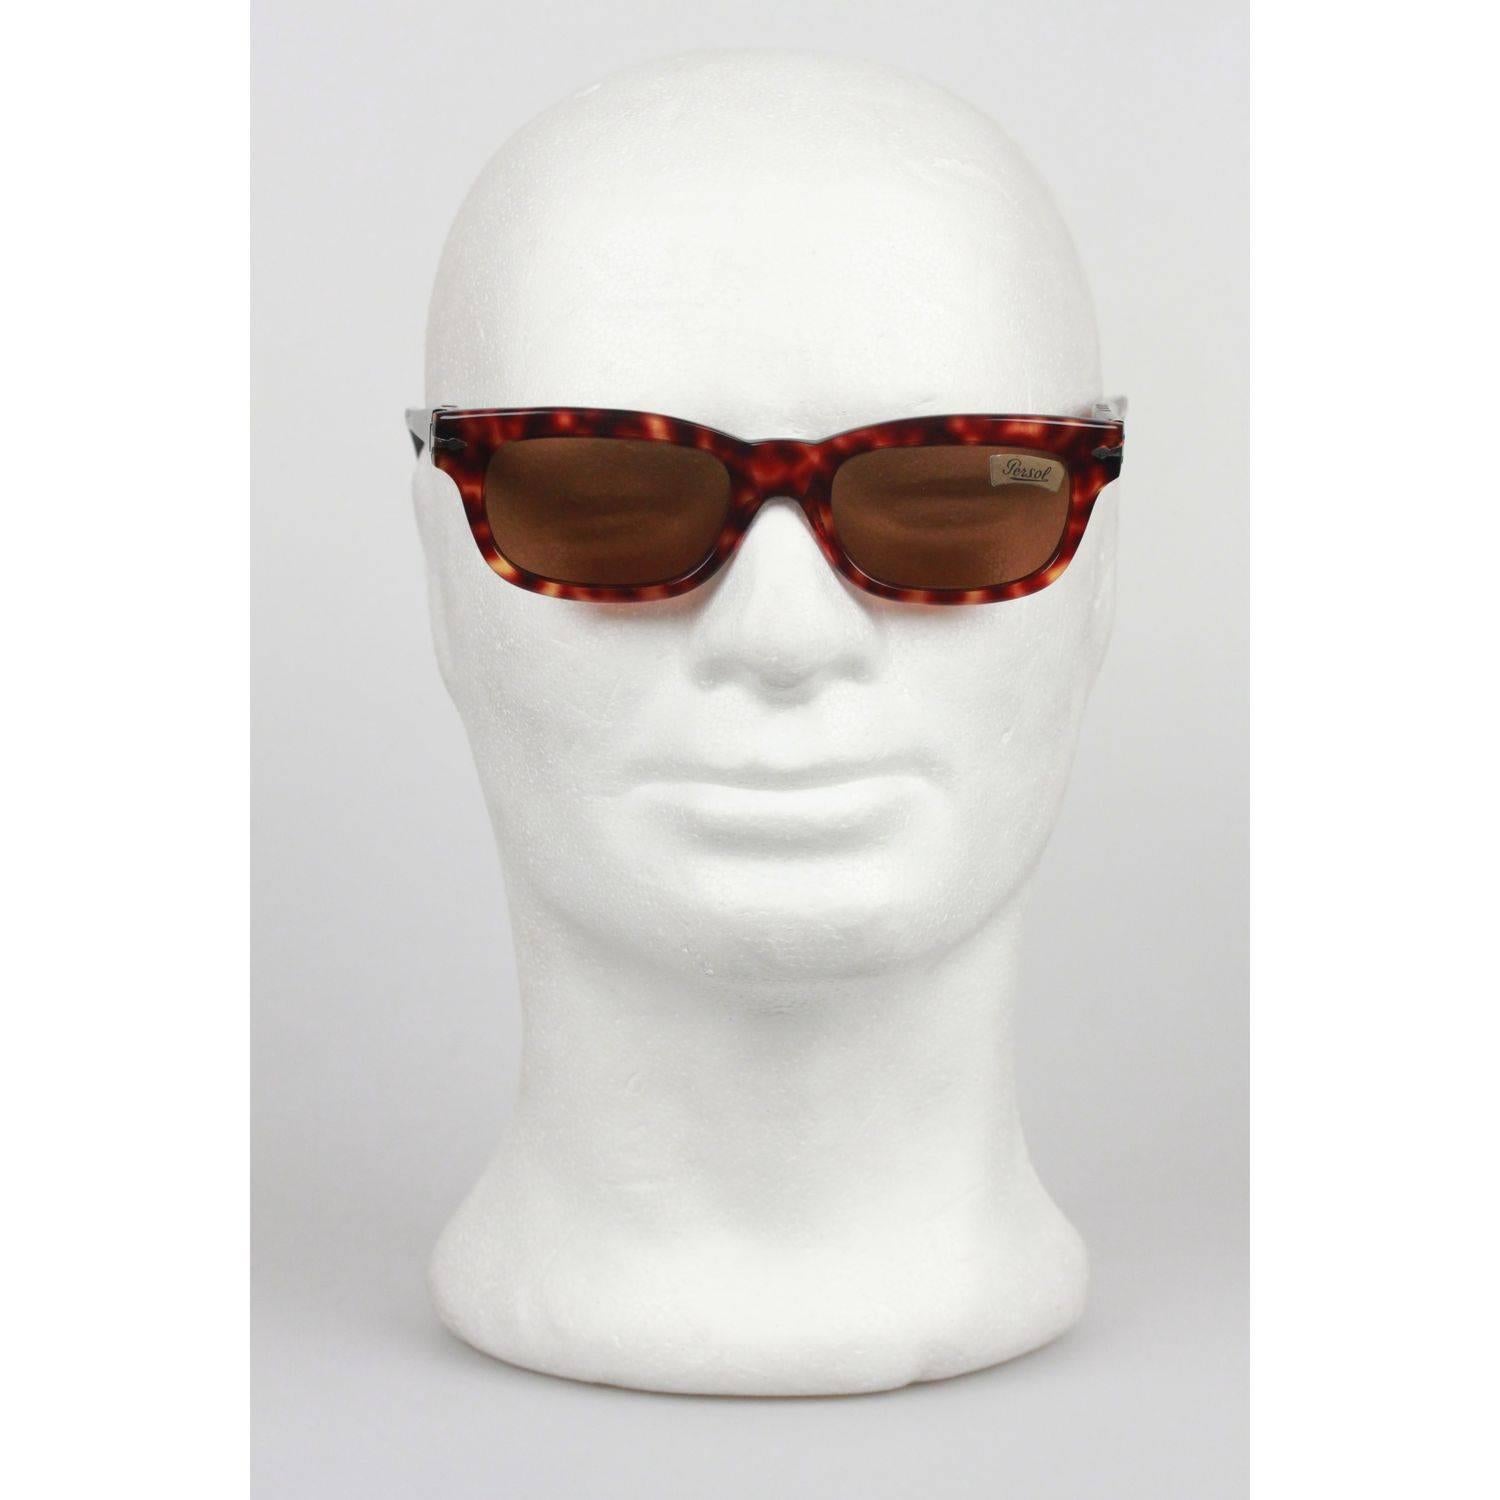 - Unisex designer shades by Persol Ratti from Italy - Brown tortoise plastic frame - flexible Meflecto System - high-end mineral lenses (100% UV) with Persol logo - made in Italy - Mod.841/29

MATERIAL:

Acetate

COLOR:

Brown

LENS